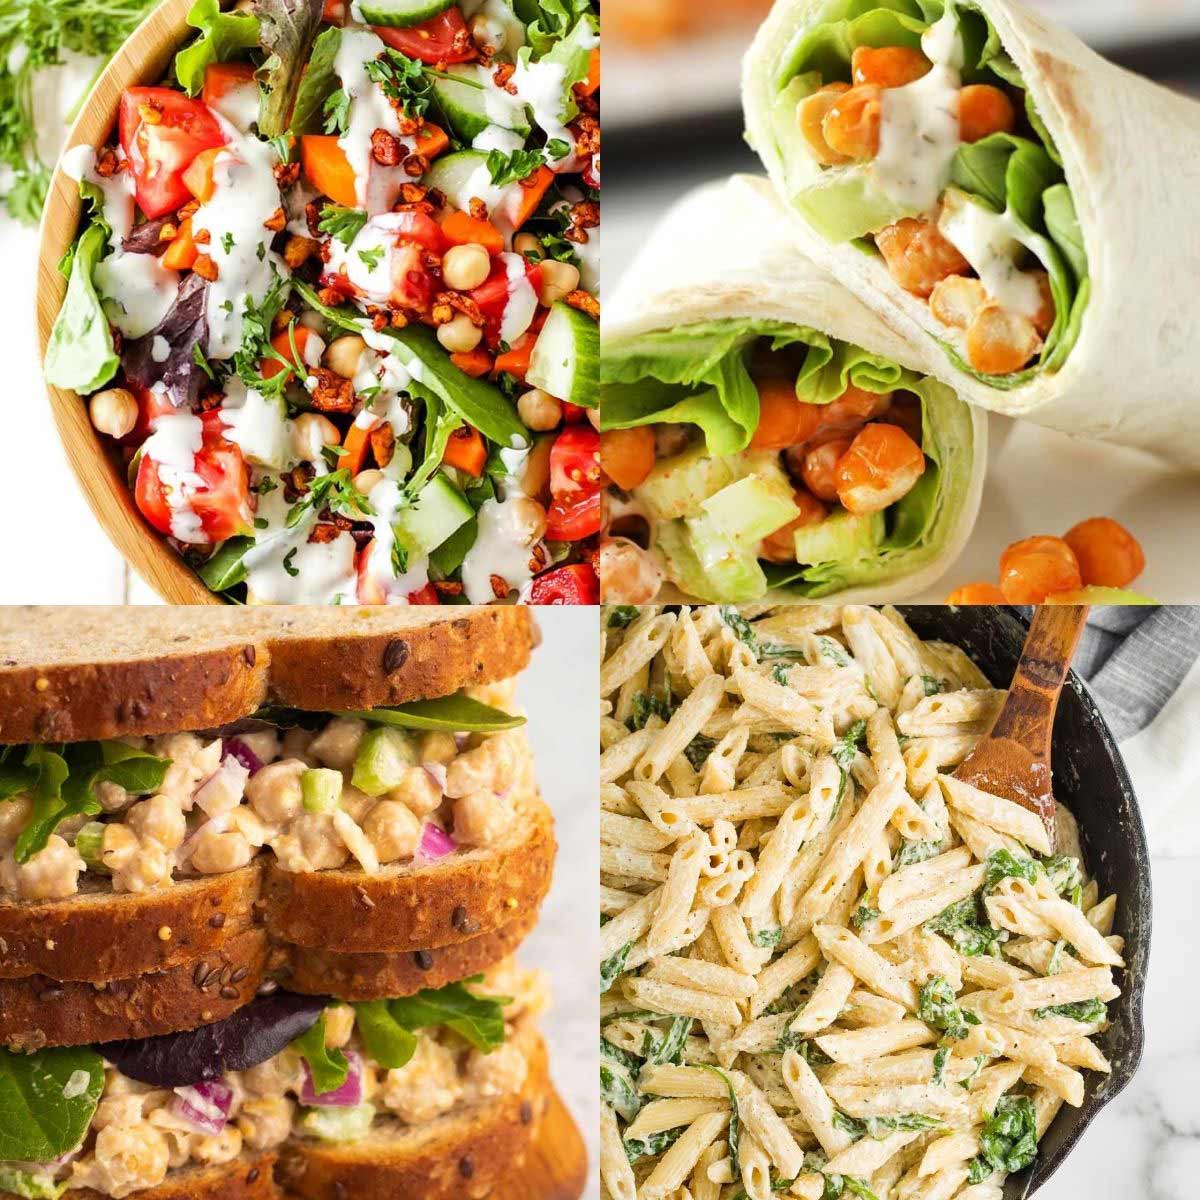 16 Easy Vegan Lunch Ideas You Can make in 15 Minutes or Less